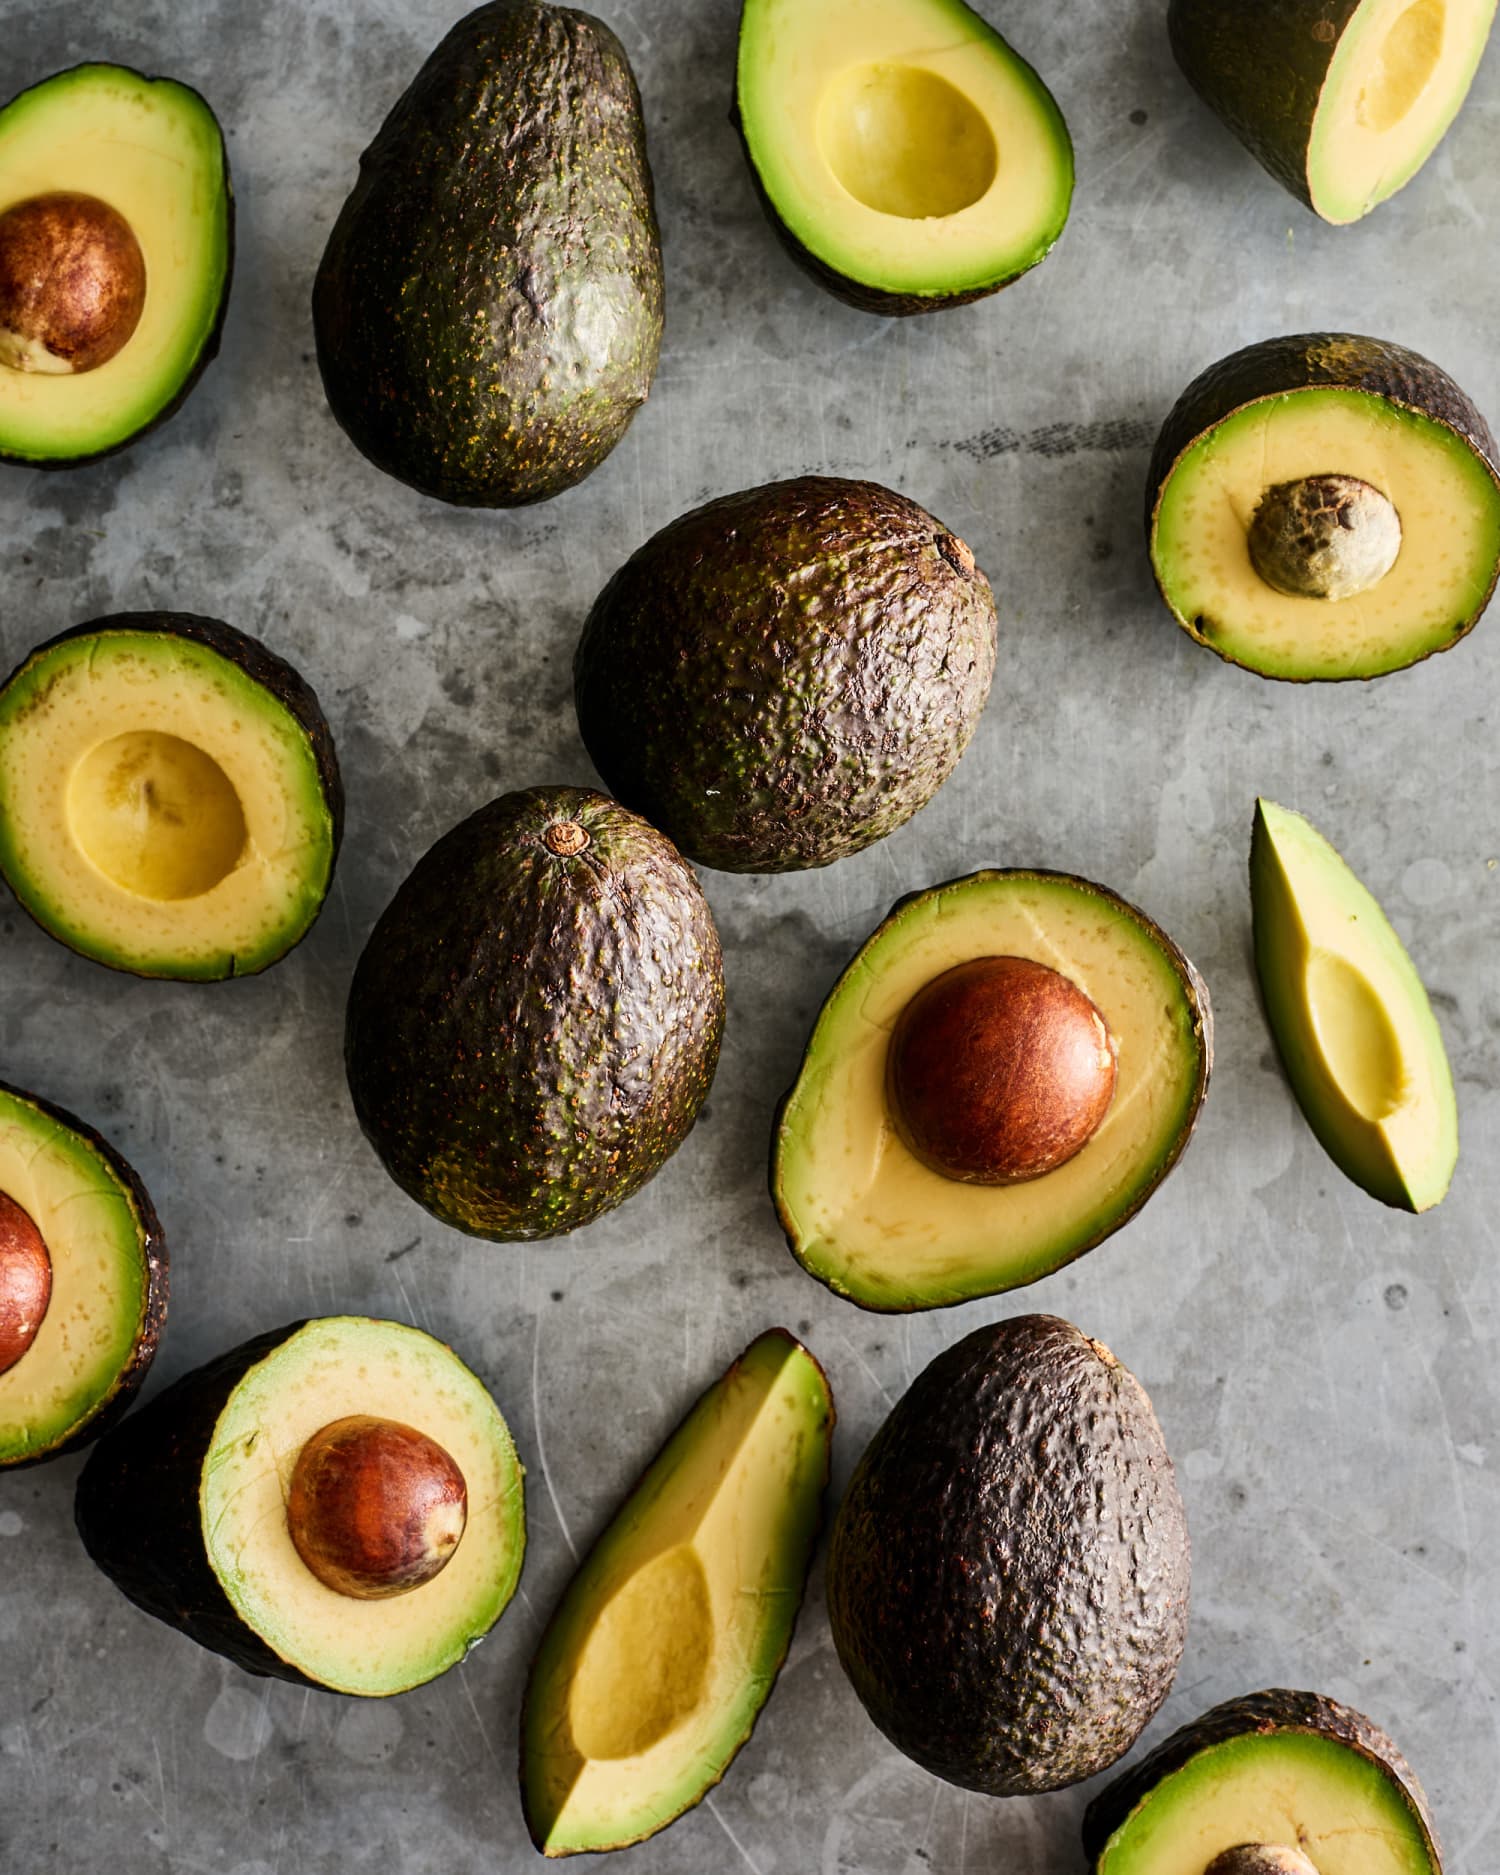 Avocados: The Best Ways to Pick Them, Cook Them, and Eat Them